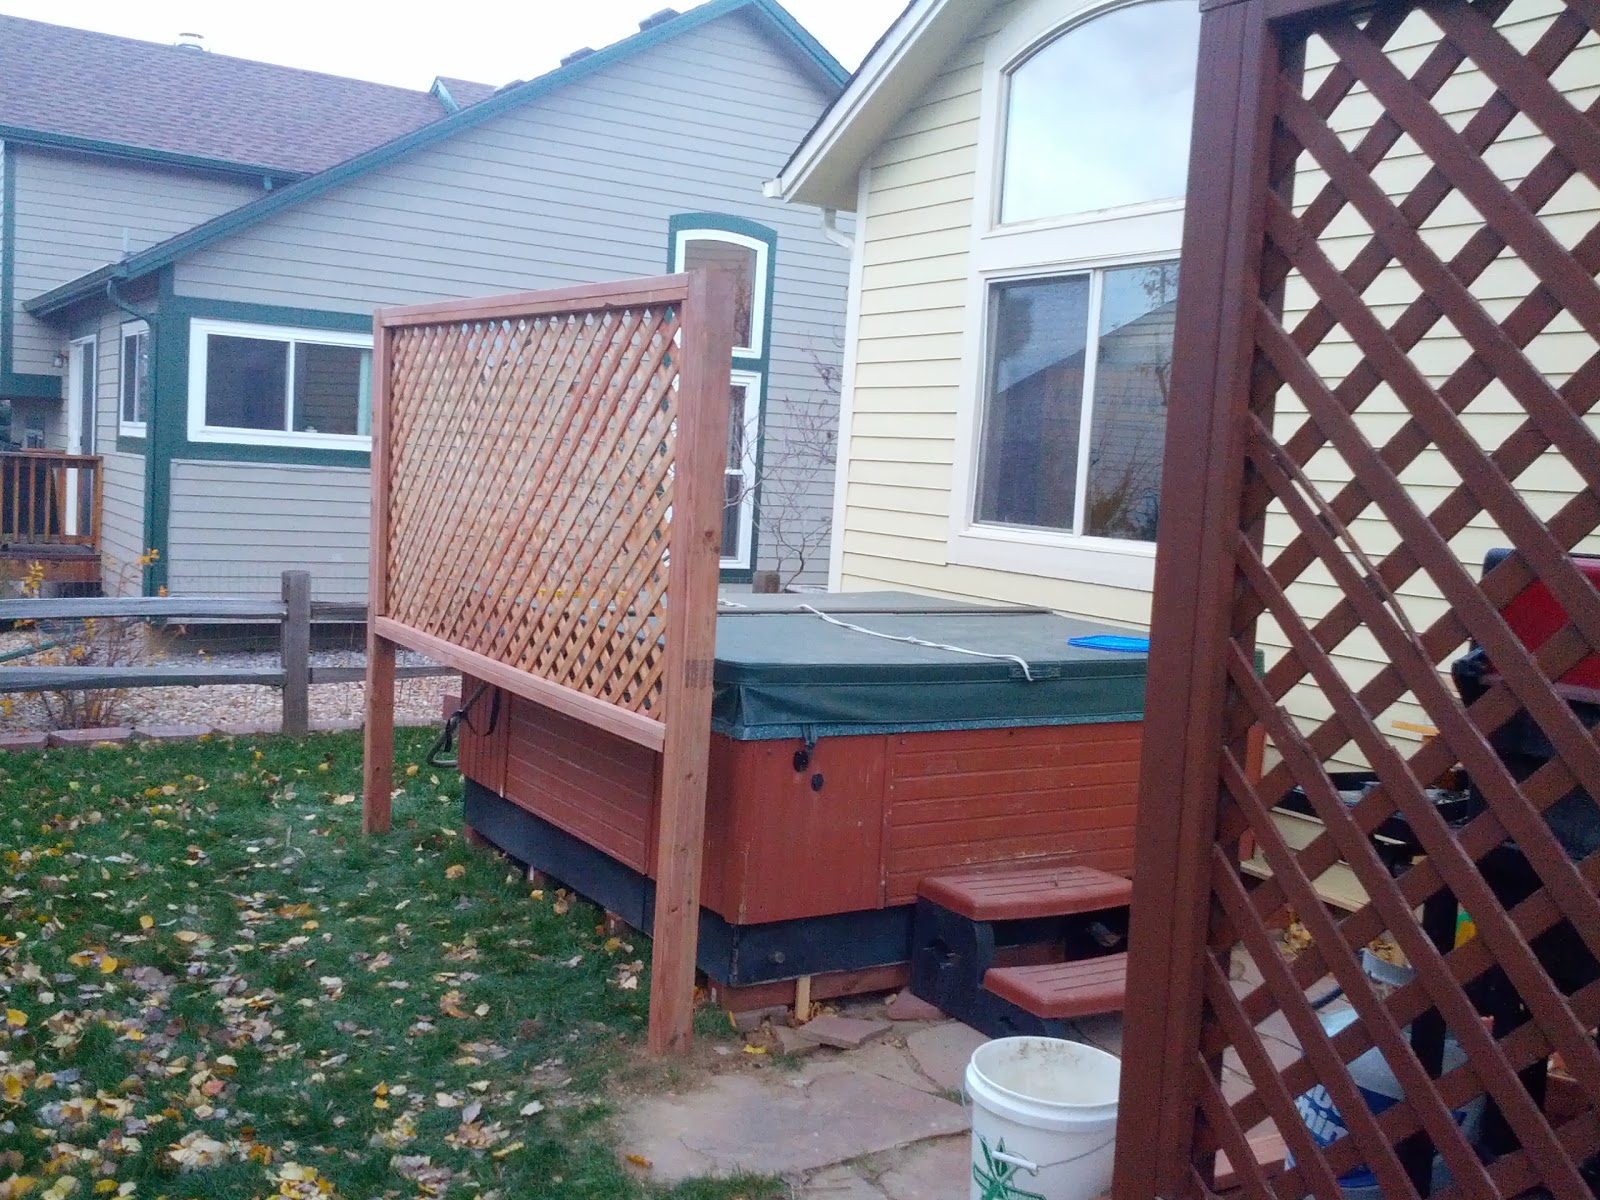 Green Bird Nsa Edition Privacy Fence Around The Hot Tub